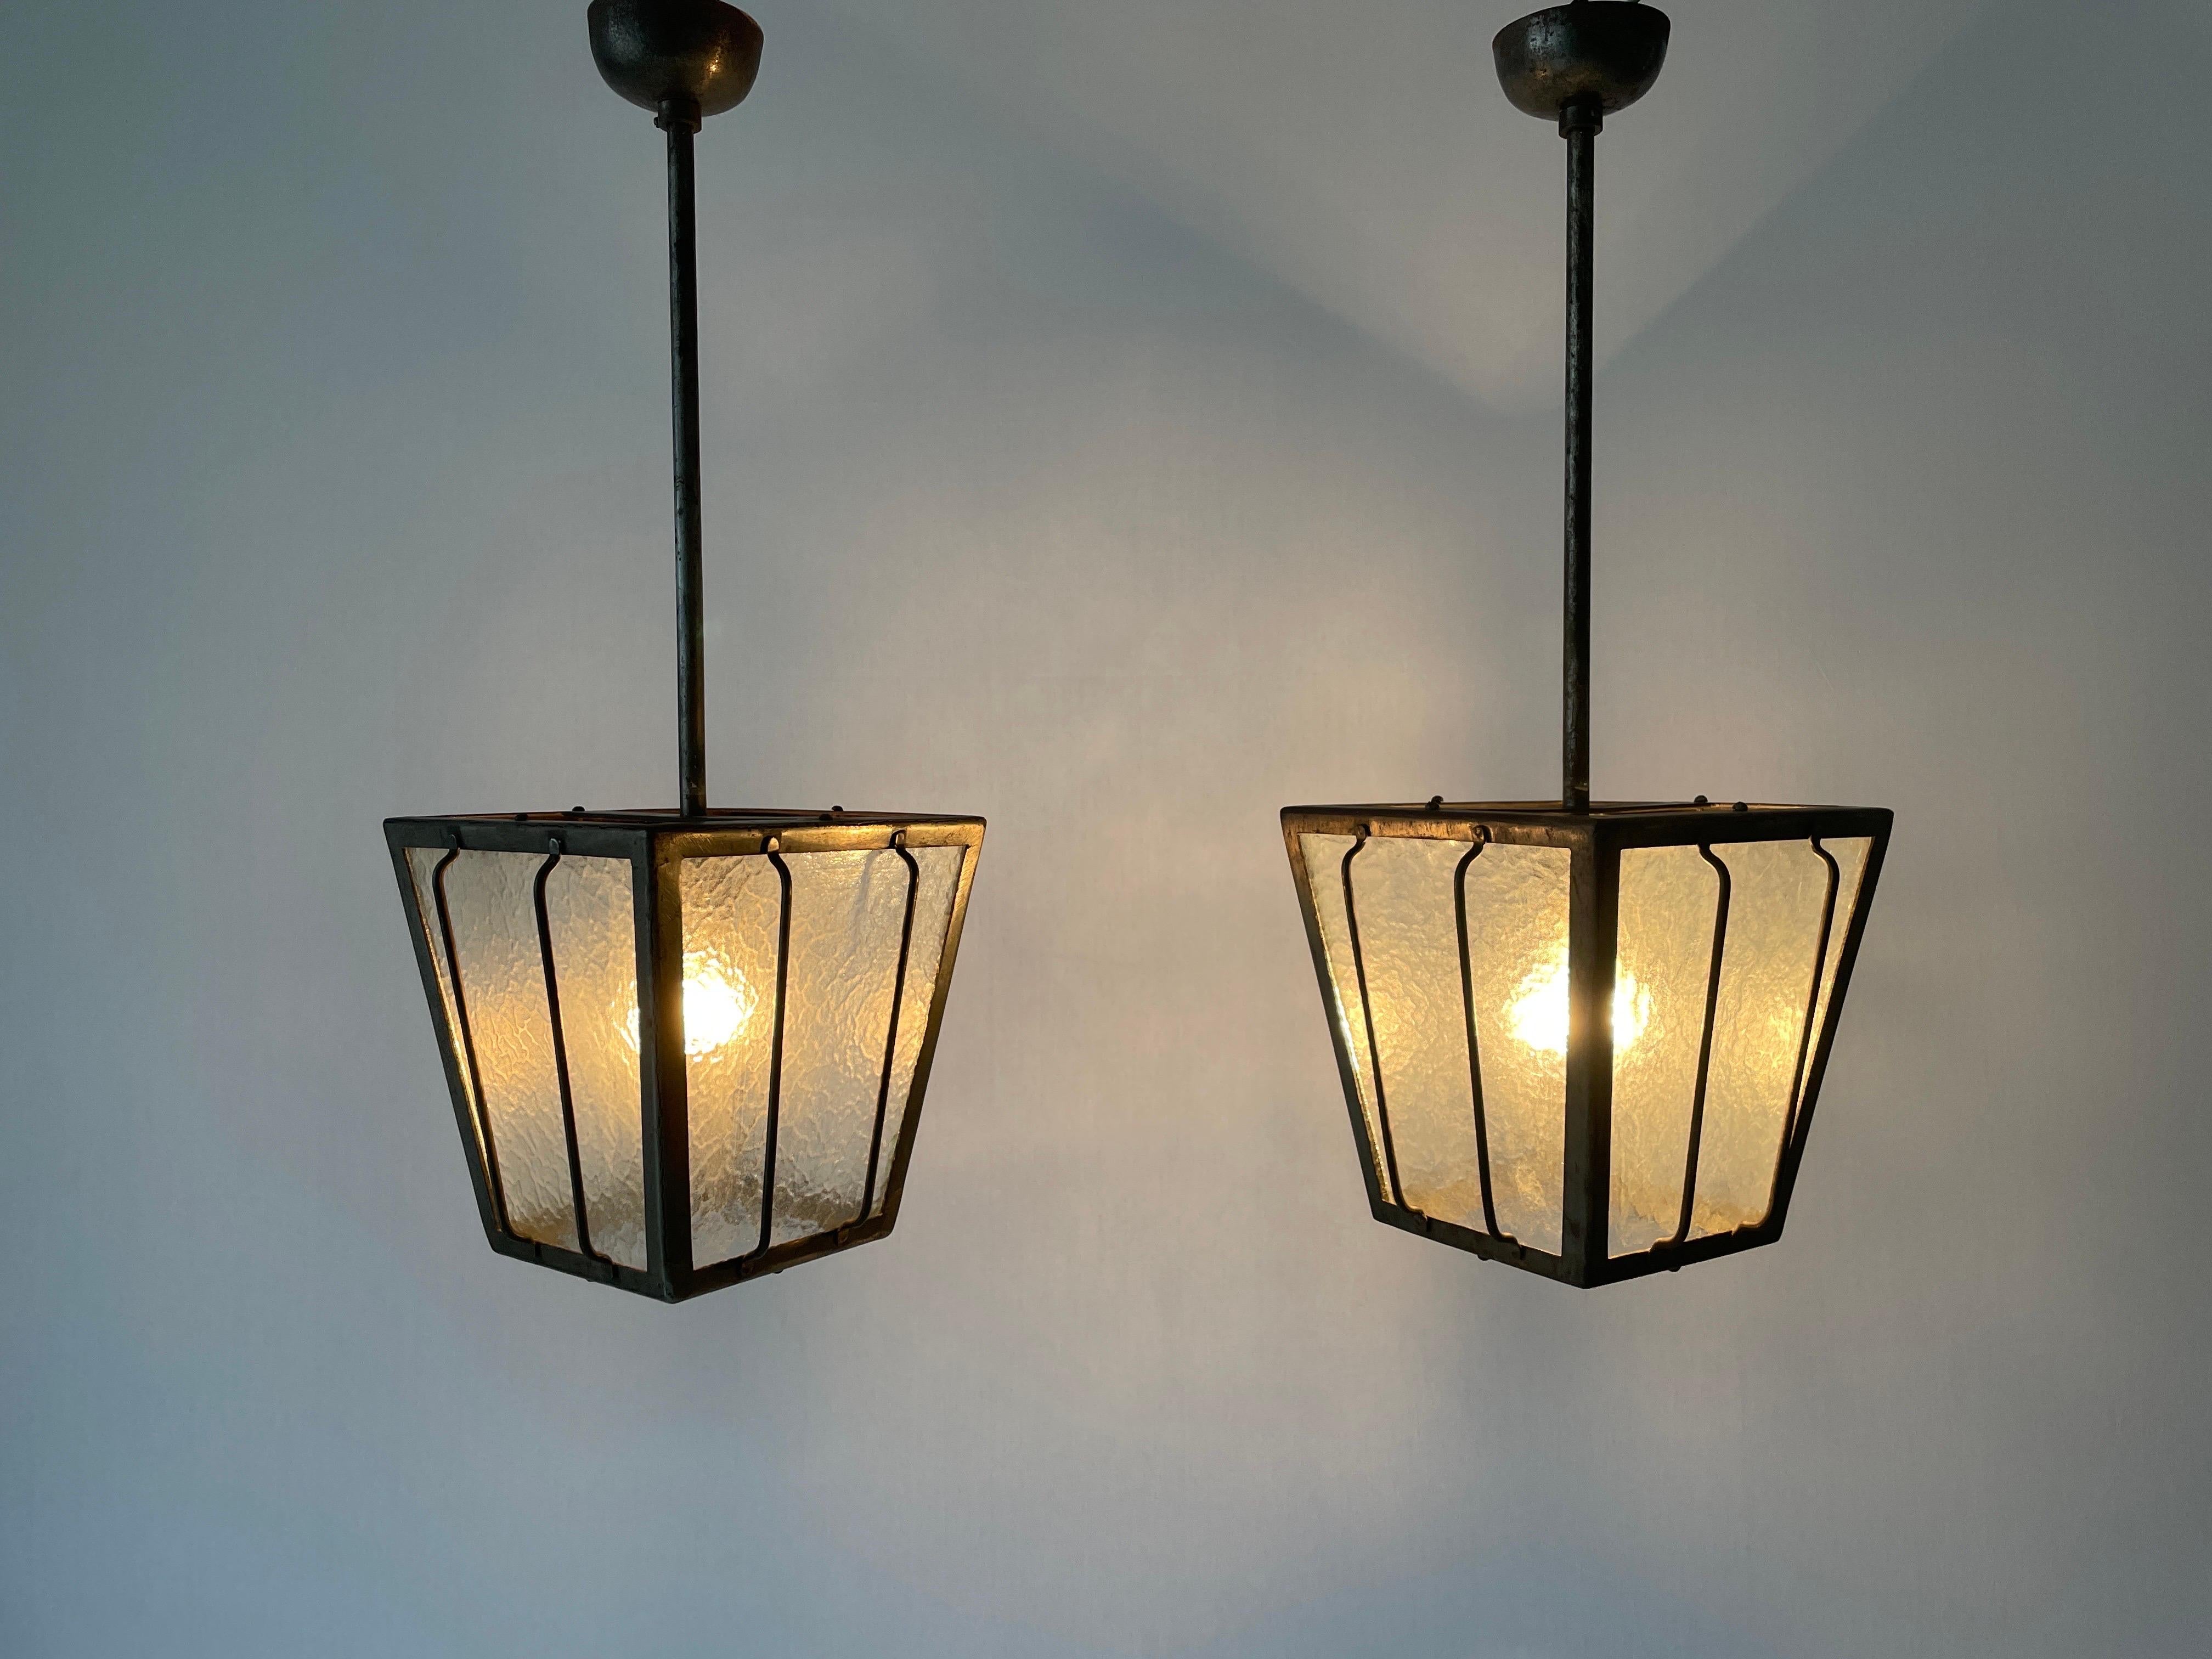 Frosted Glass Milano Apartment Pair of Ceiling Lamps, 1950s, Italy For Sale 3